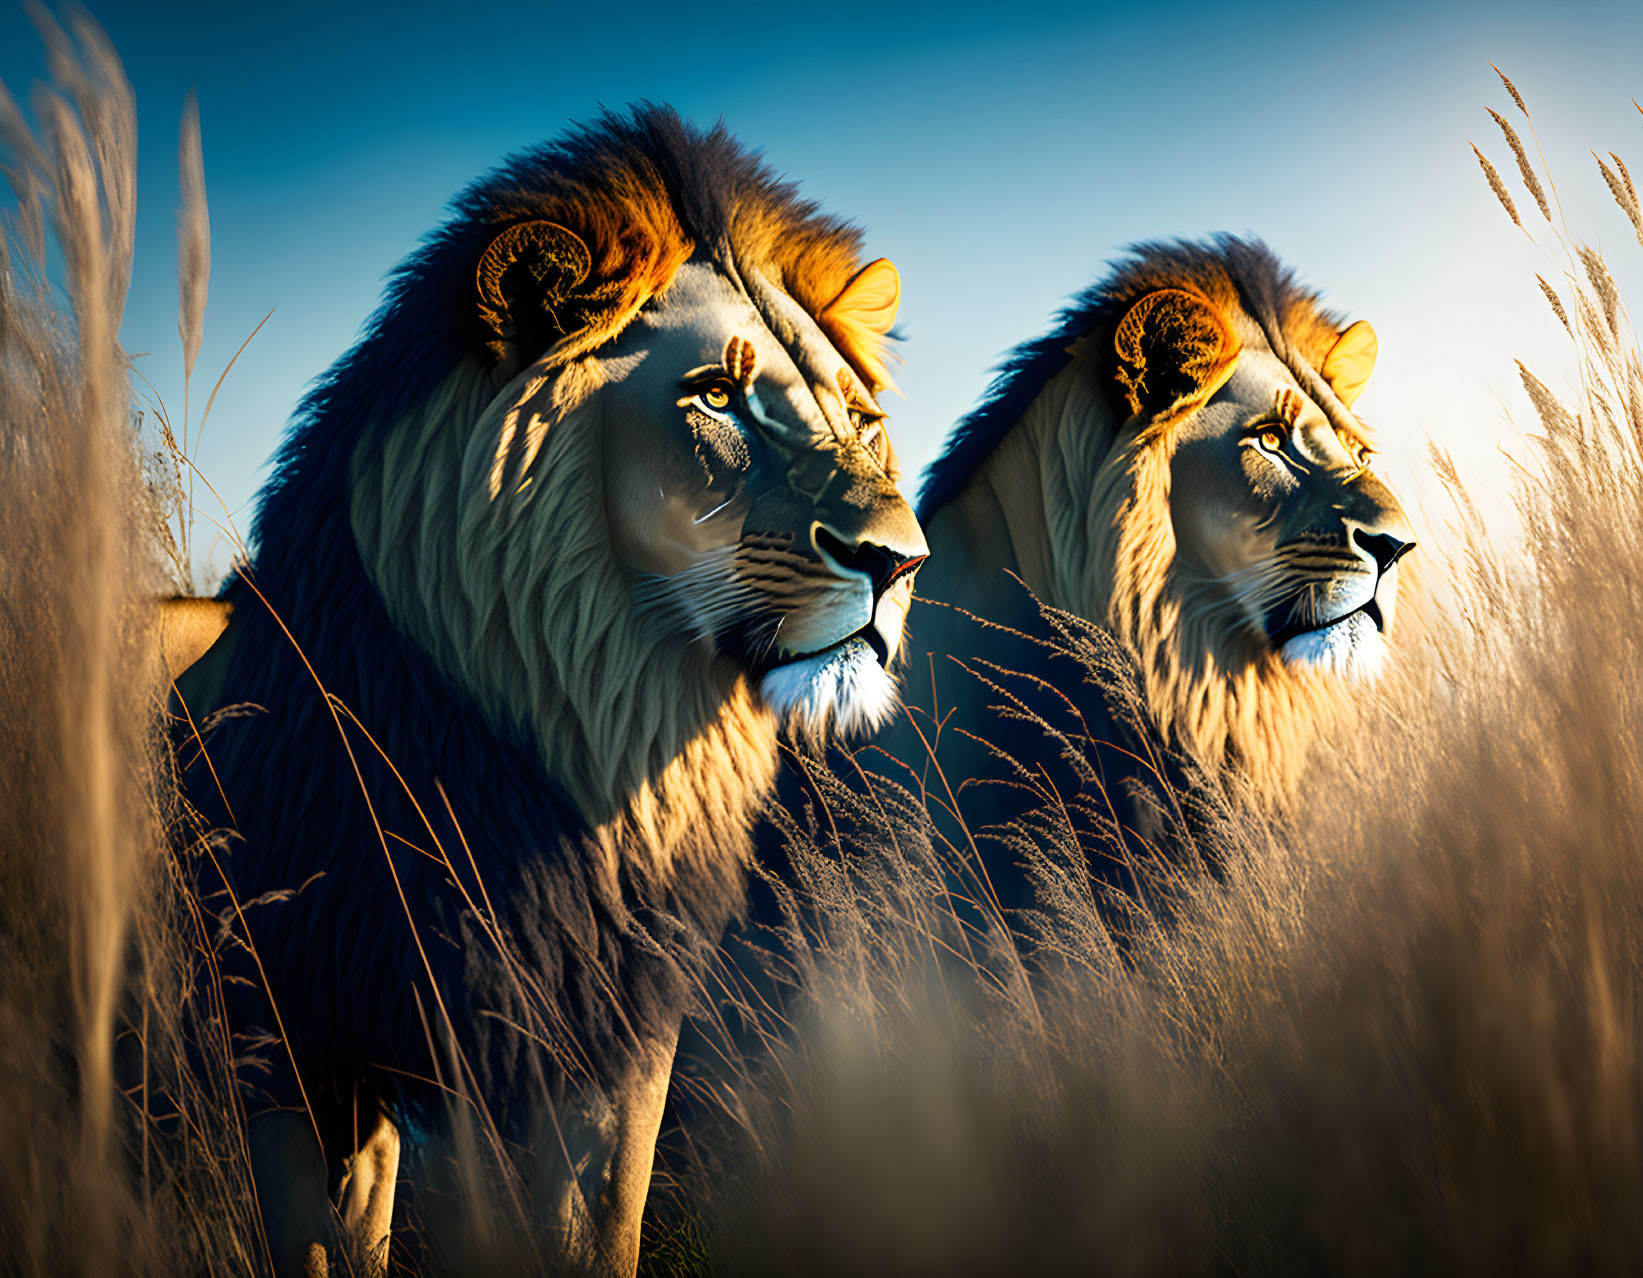 Radiant maned lions in tall grass at sunset